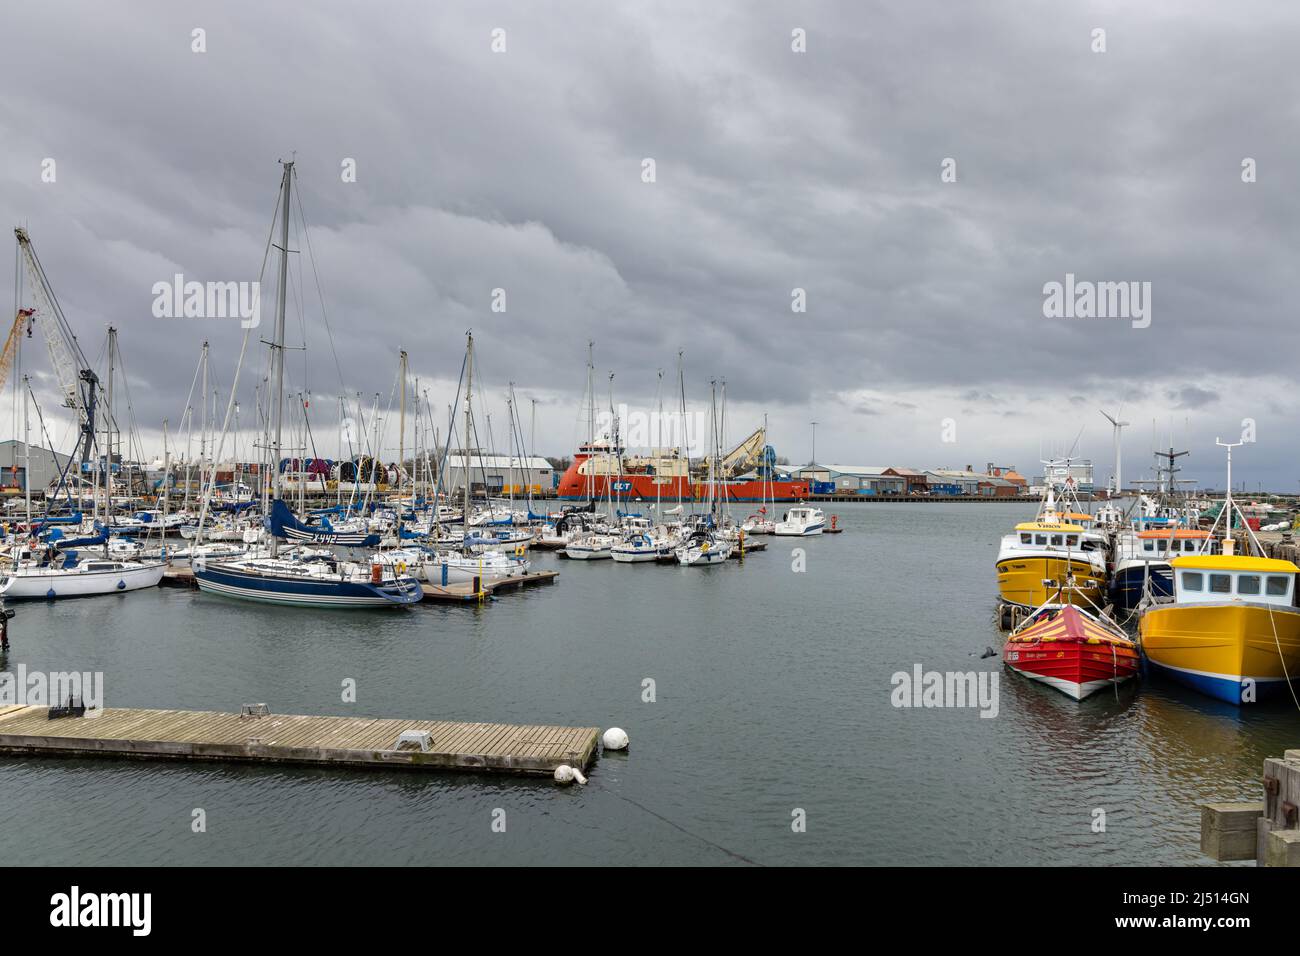 South Harbour and Yacht Club, Blyth, Northumberland, Angleterre. Banque D'Images